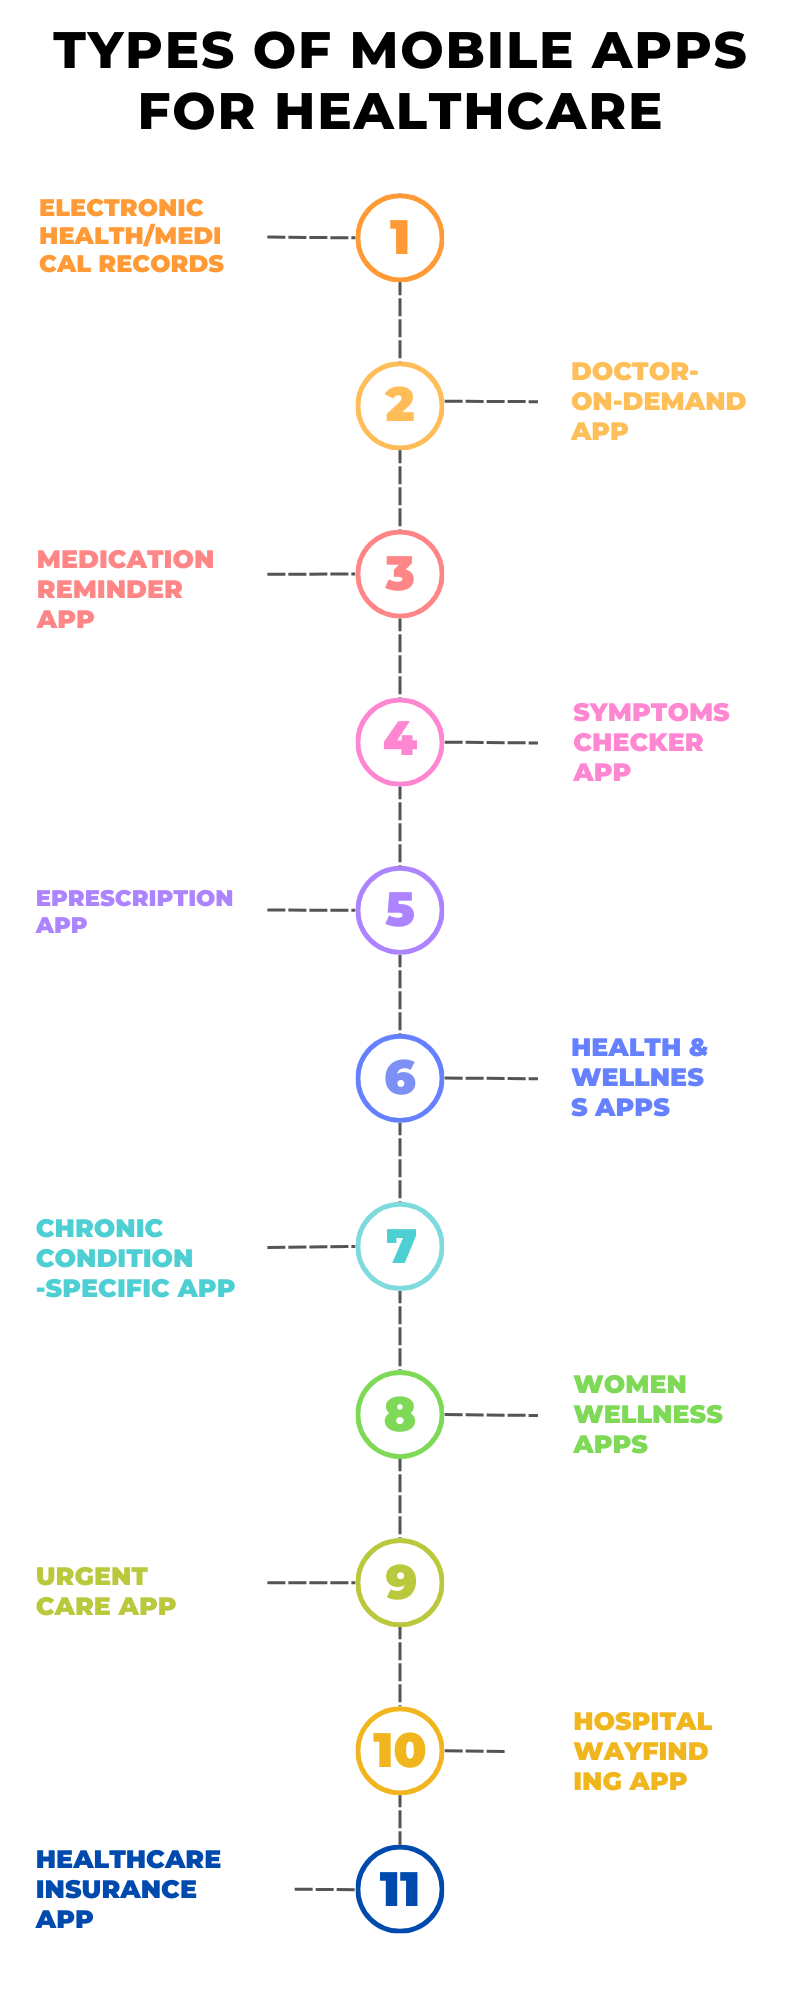 Types of Mobile Apps for Healthcare